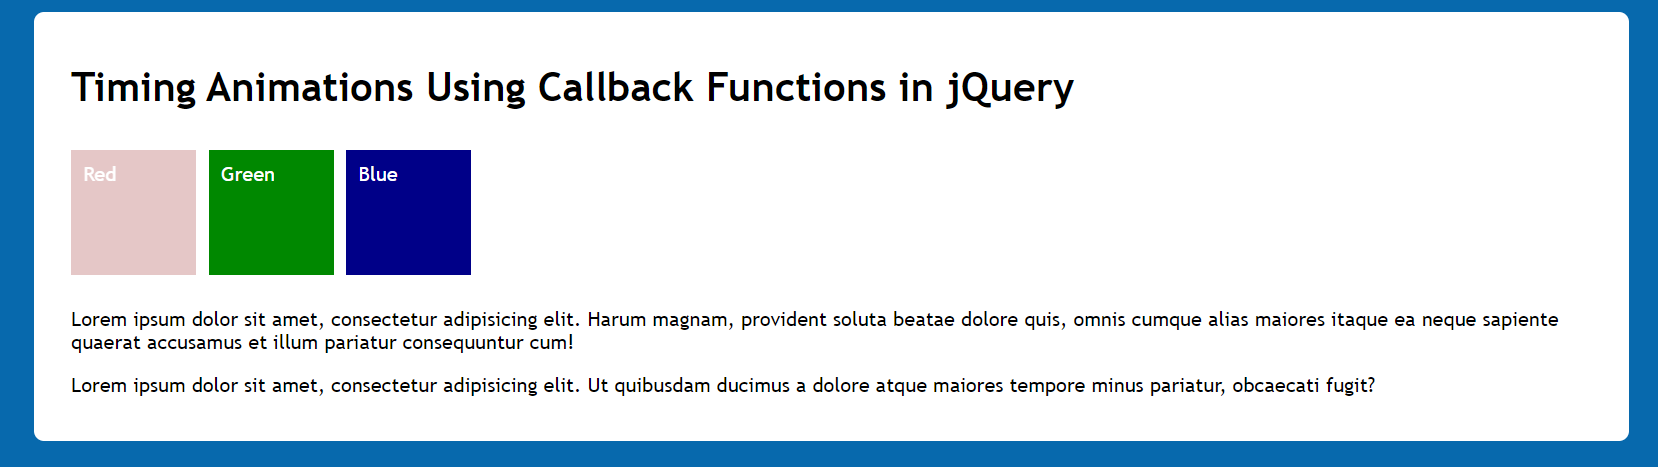 How to use Timing Animations Using Callback Functions in jQuery? - scmGalaxy